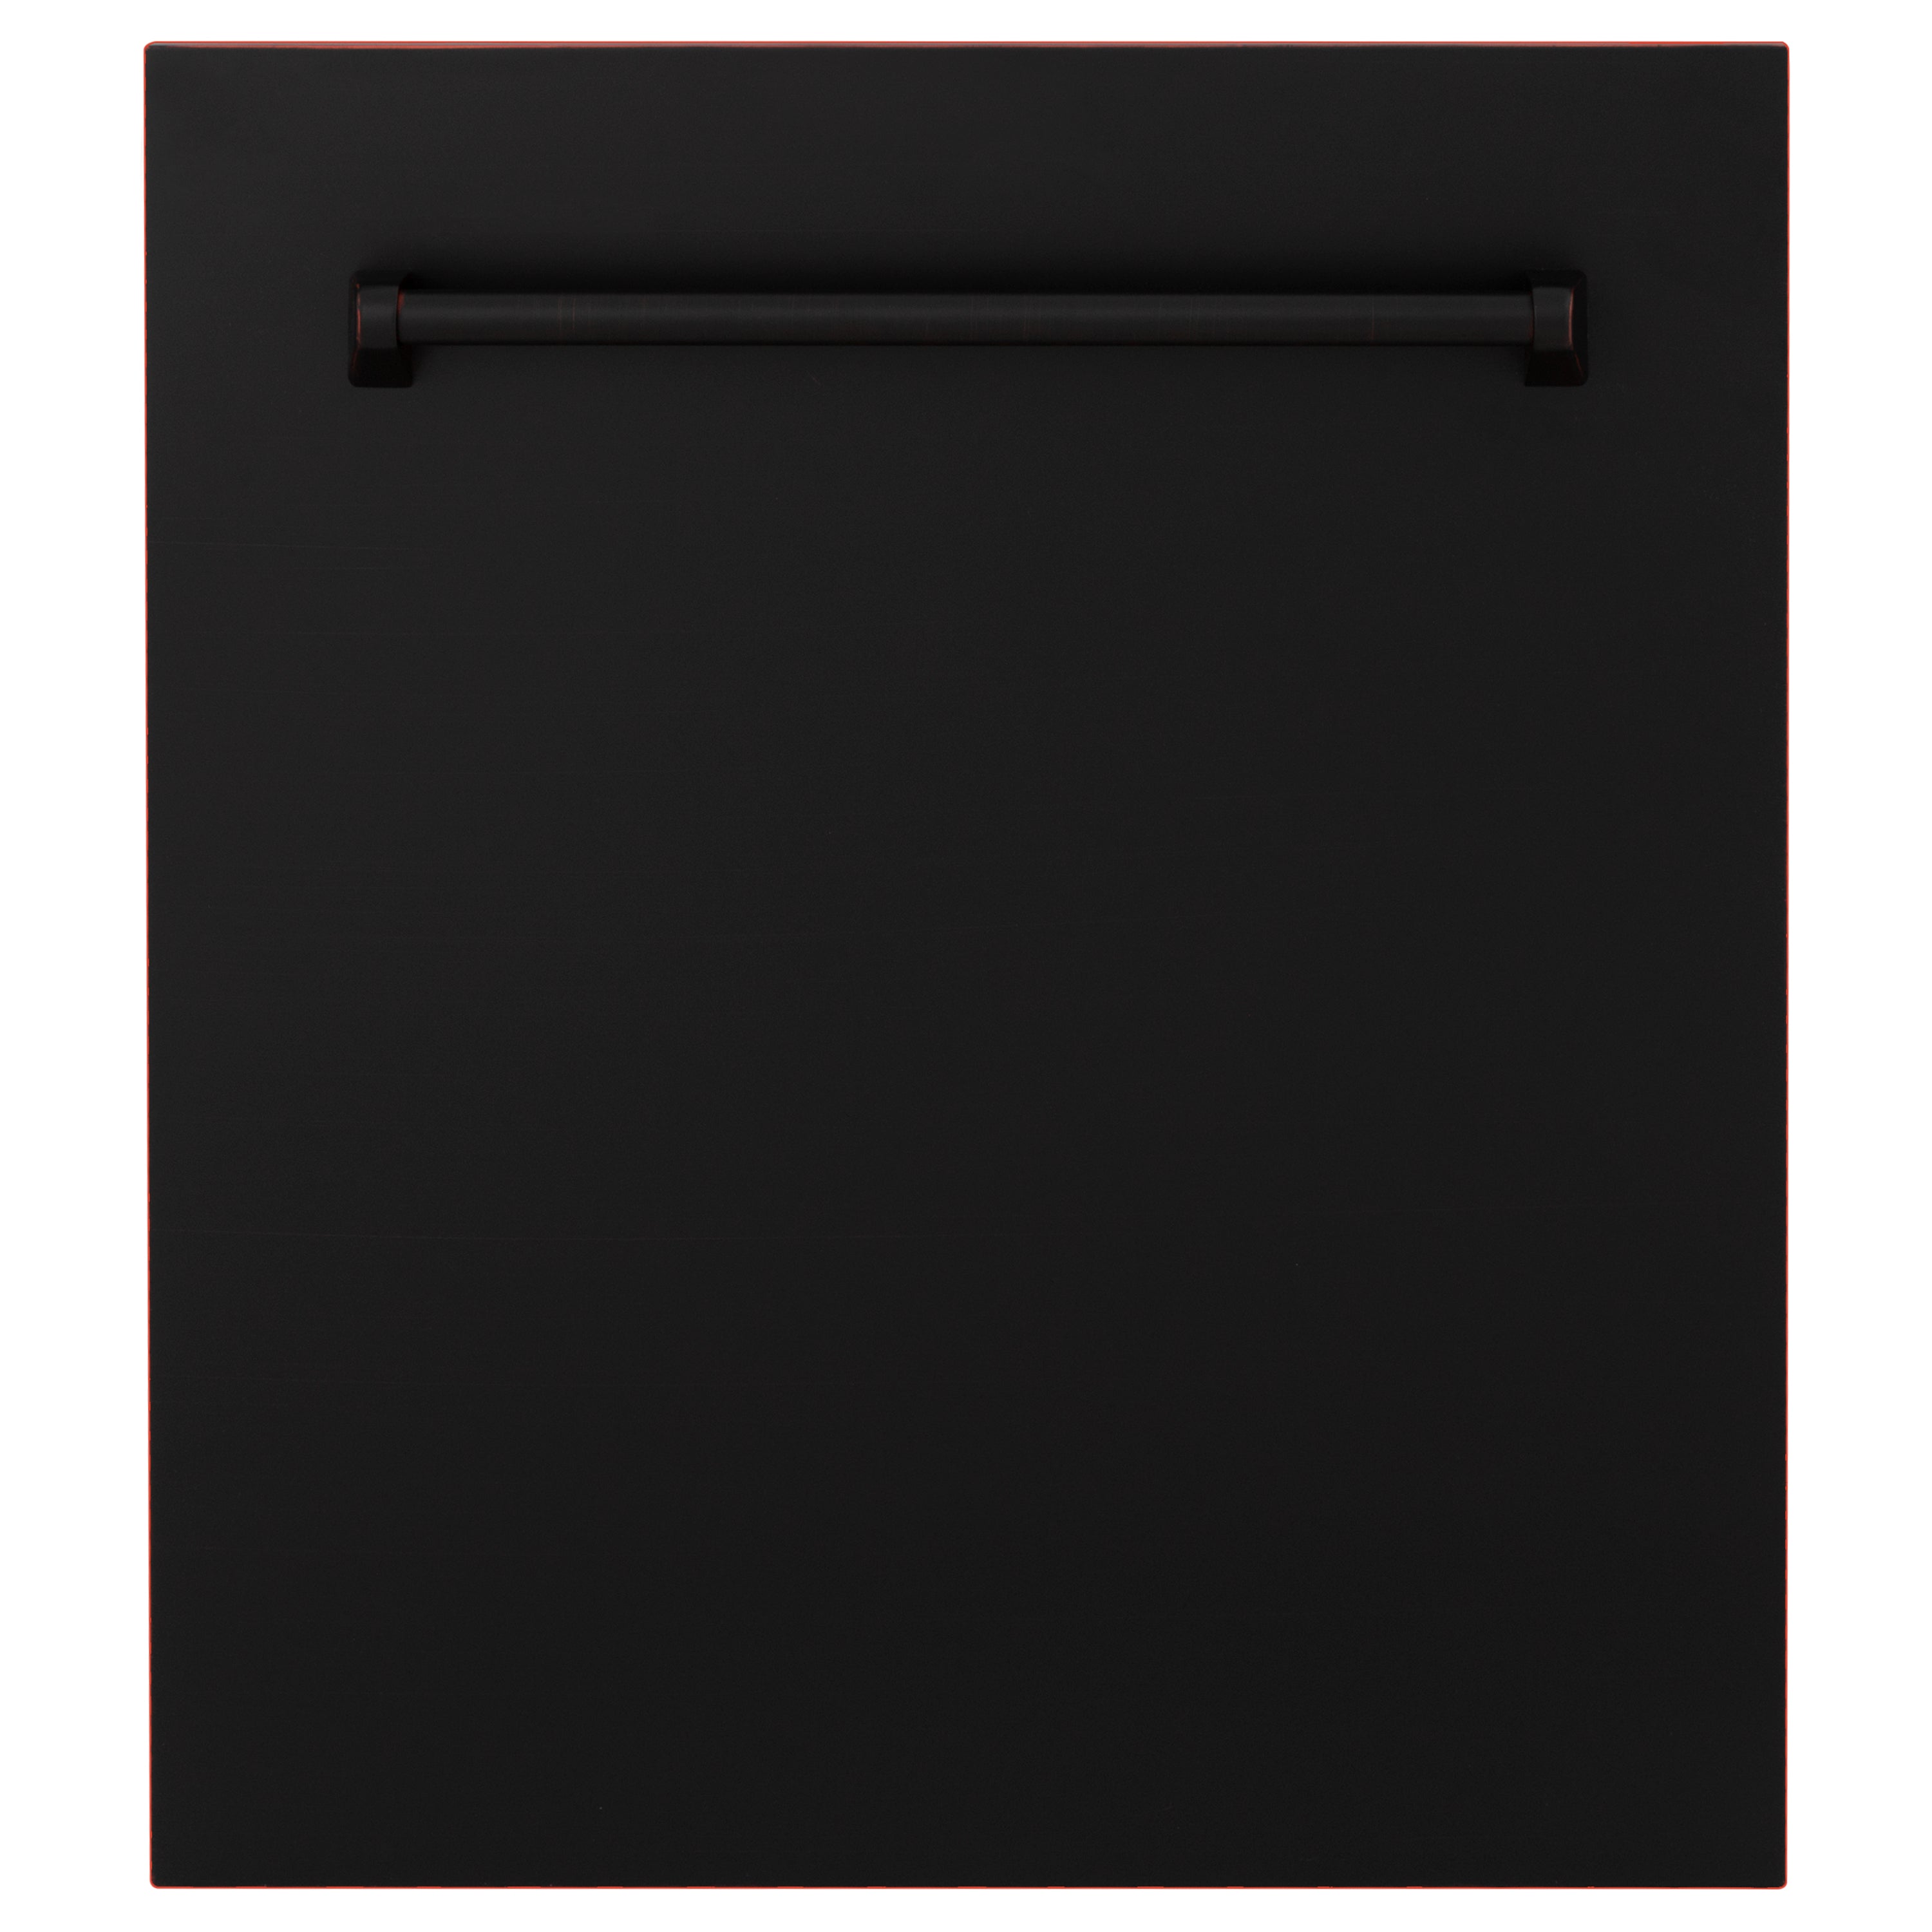 ZLINE 24" Tallac Series 3rd Rack Tall Tub Dishwasher in Oil Rubbed Bronze with Stainless Steel Tub, 51dBa (DWV-ORB-24)